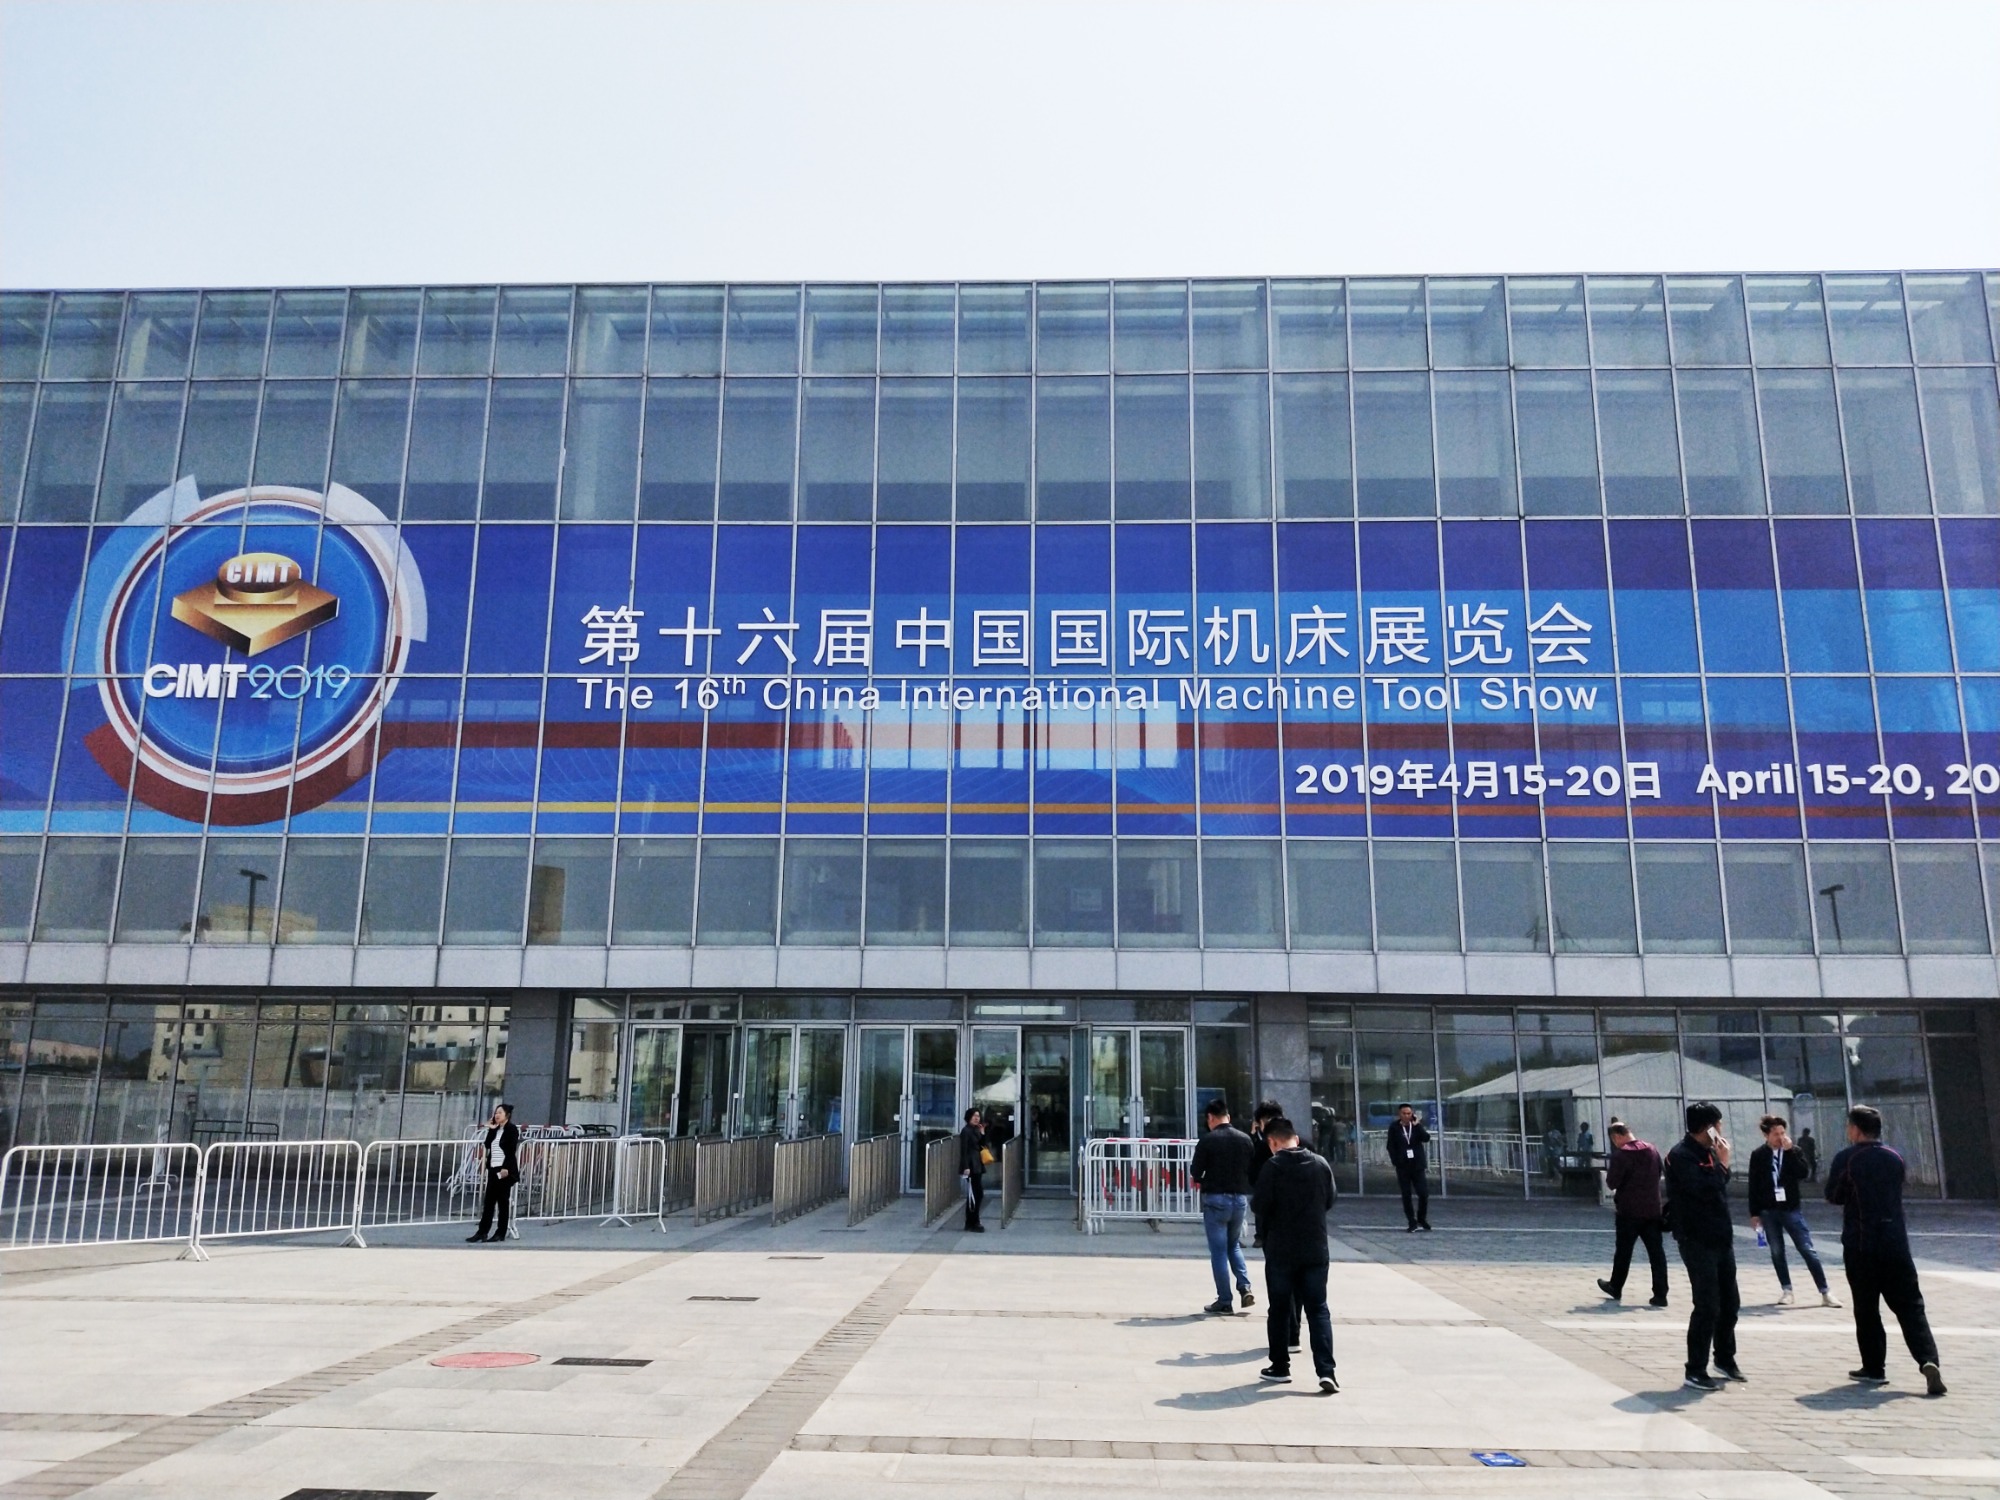 April 15th to 20th, 2019 The China International Machine Tool Show